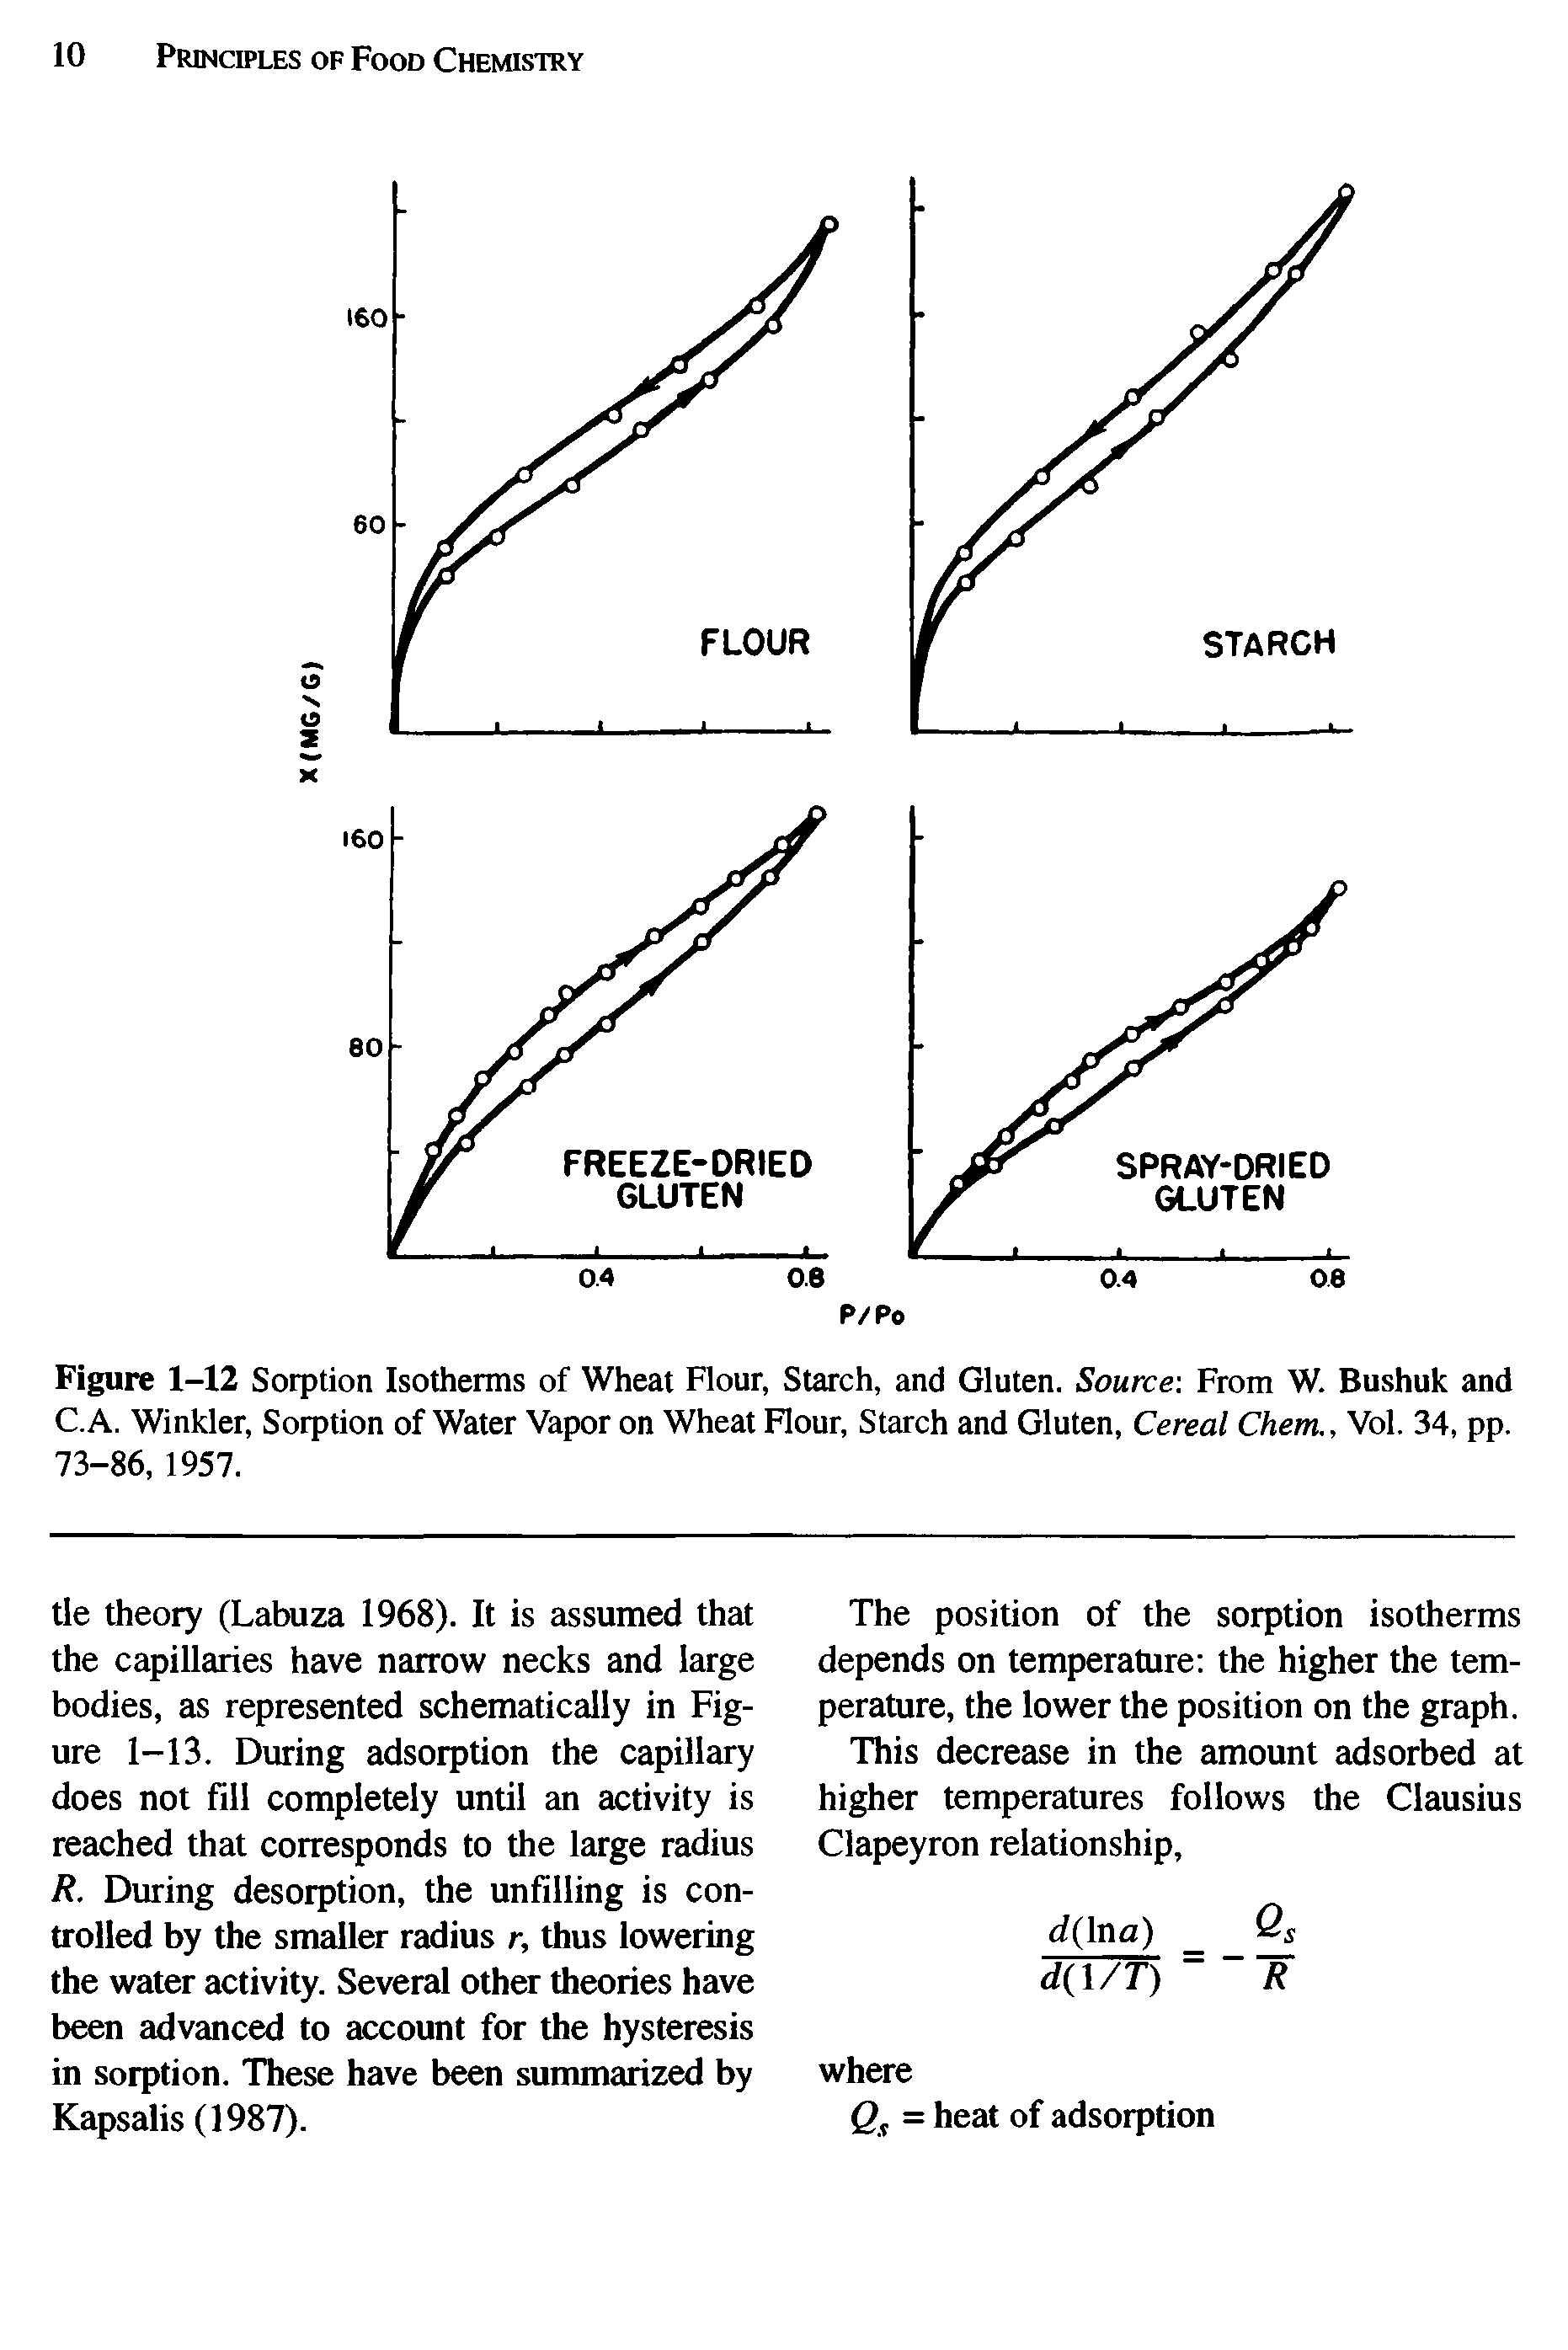 Figure 1-12 Sorption Isotherms of Wheat Flour, Starch, and Gluten. Source From W. Bushuk and C. A. Winkler, Sorption of Water Vapor on Wheat Flour, Starch and Gluten, Cereal Chem., Vol. 34, pp. 73-86, 1957.